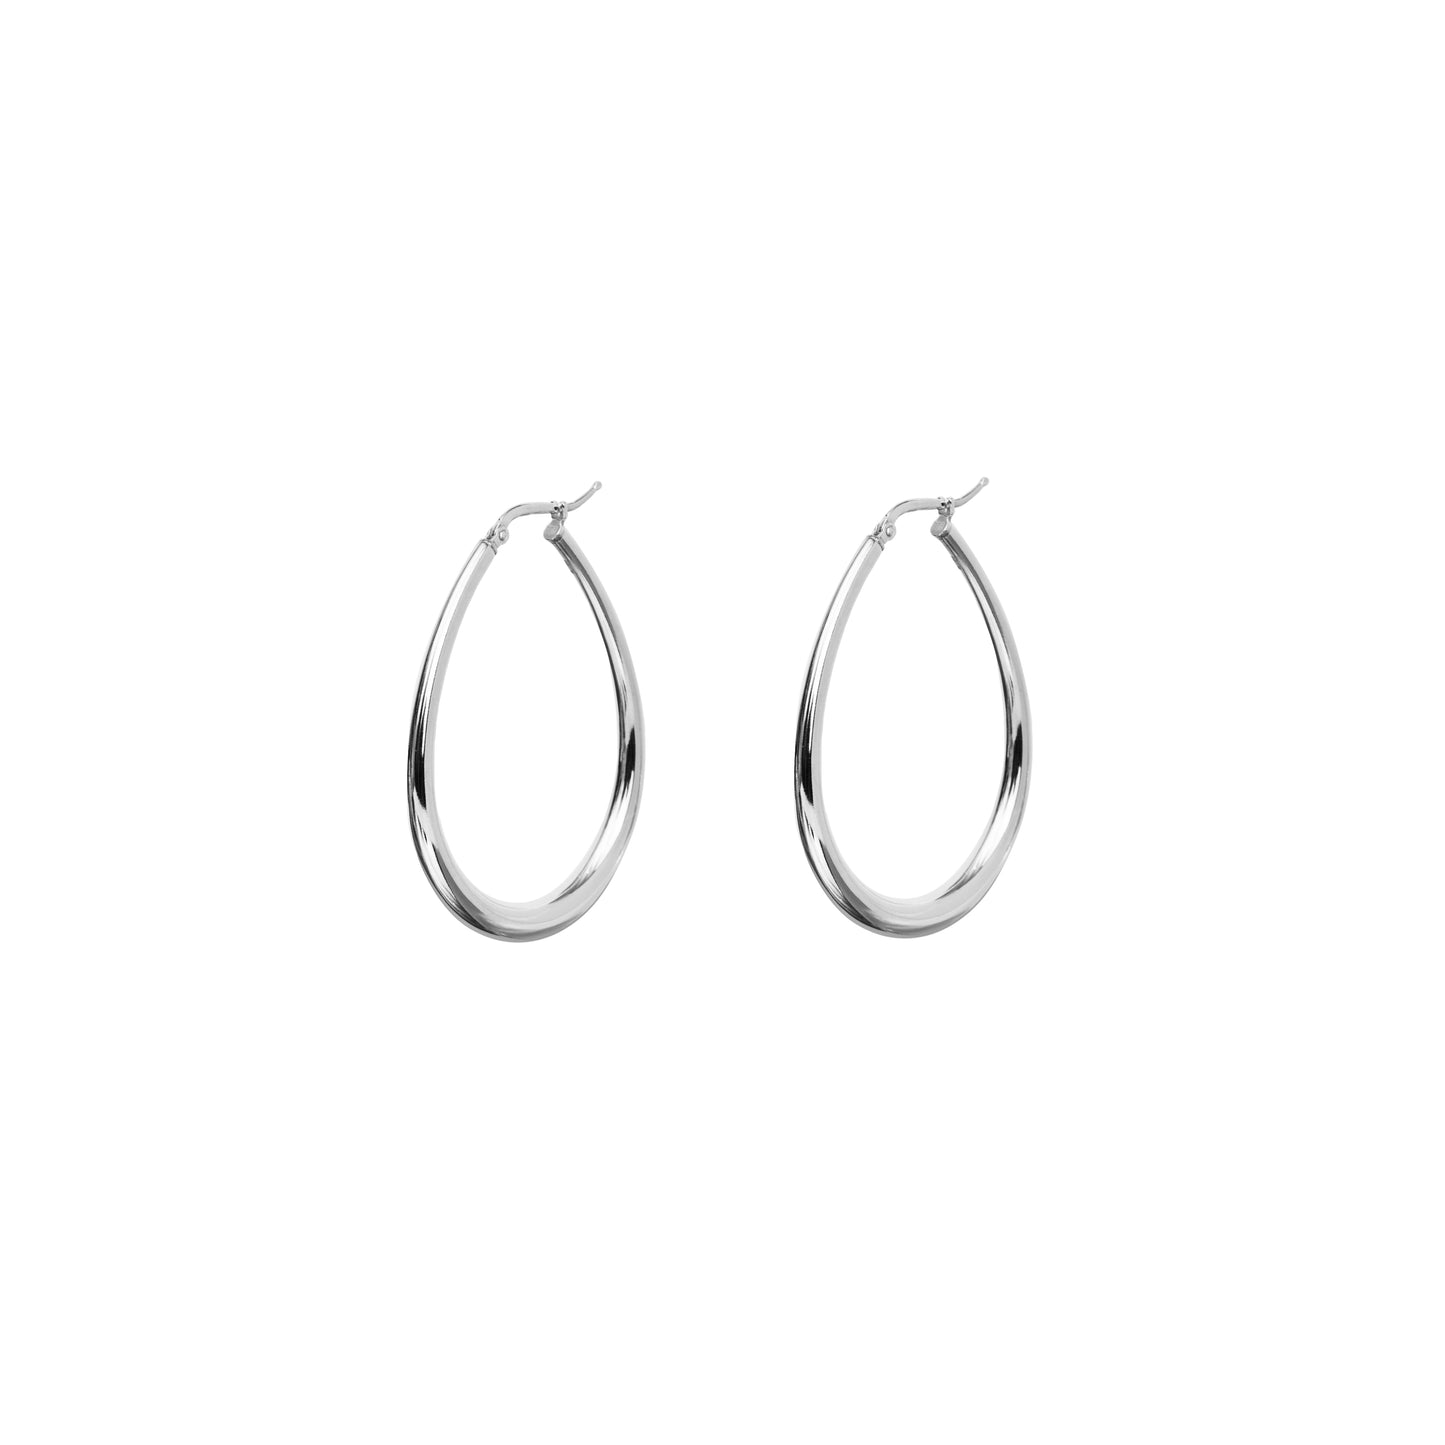 OVAL CLASSIC Hoops